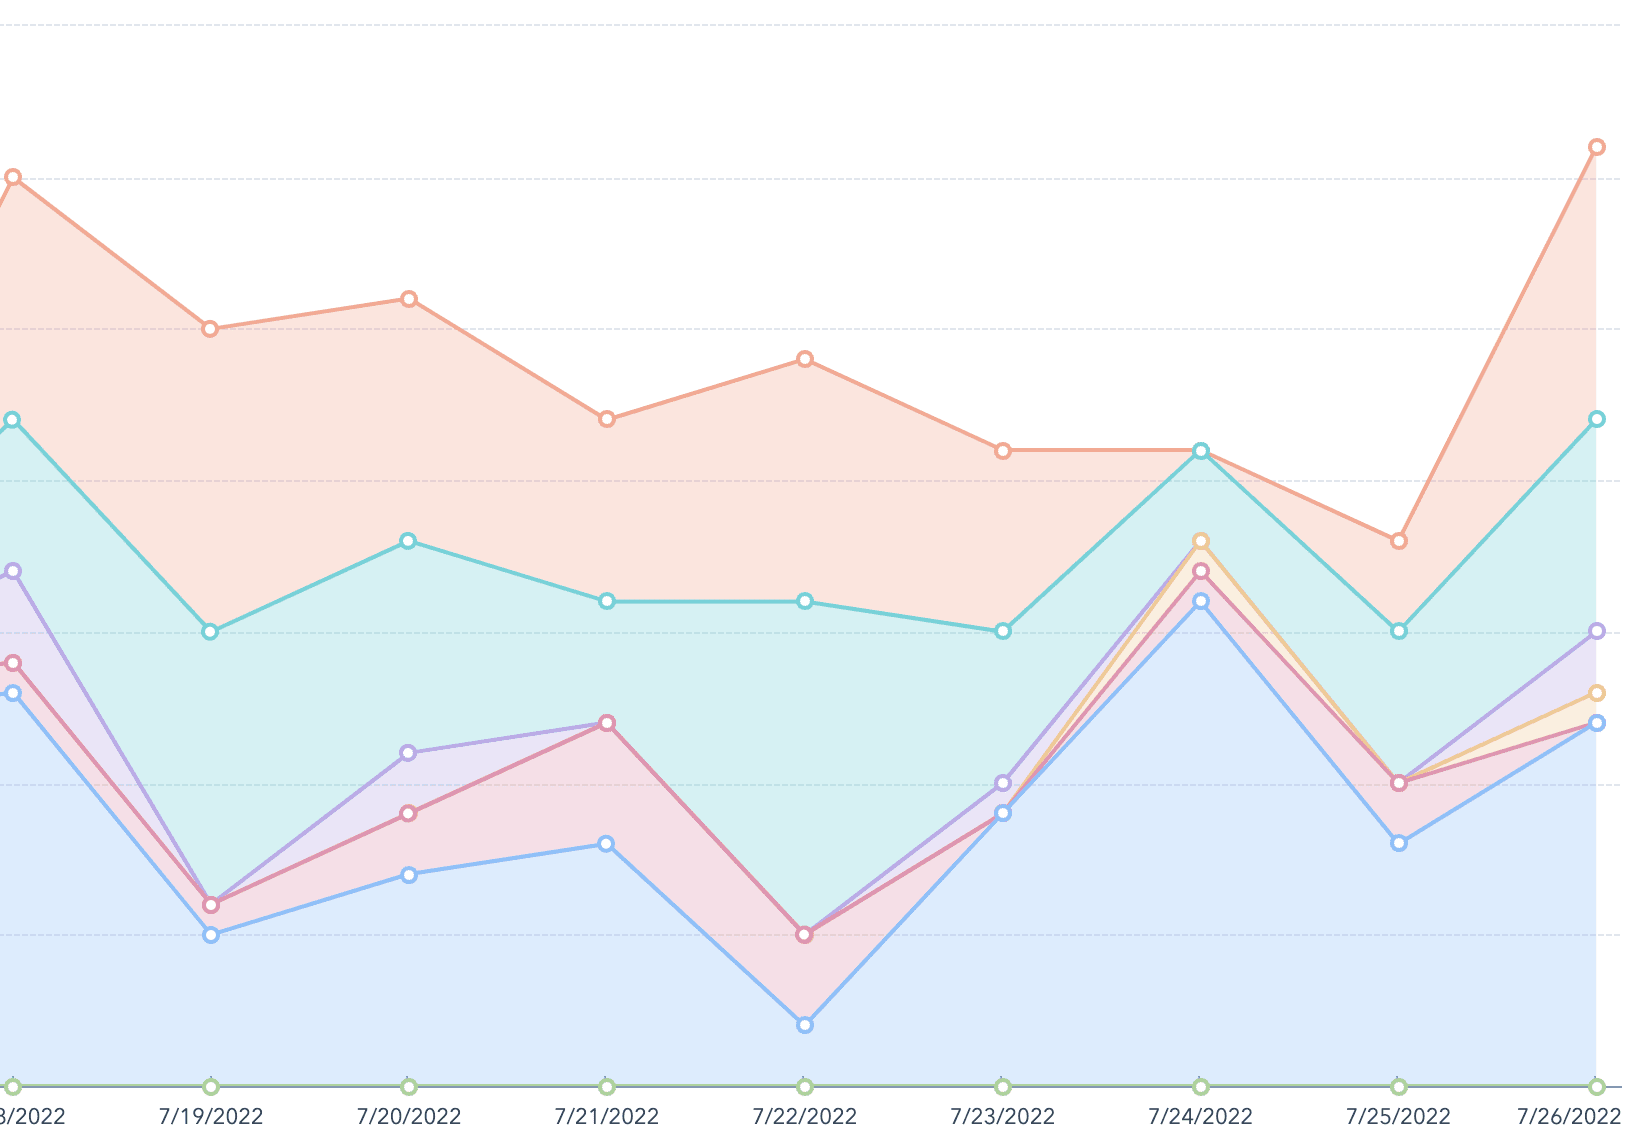 atma's graph from the past week